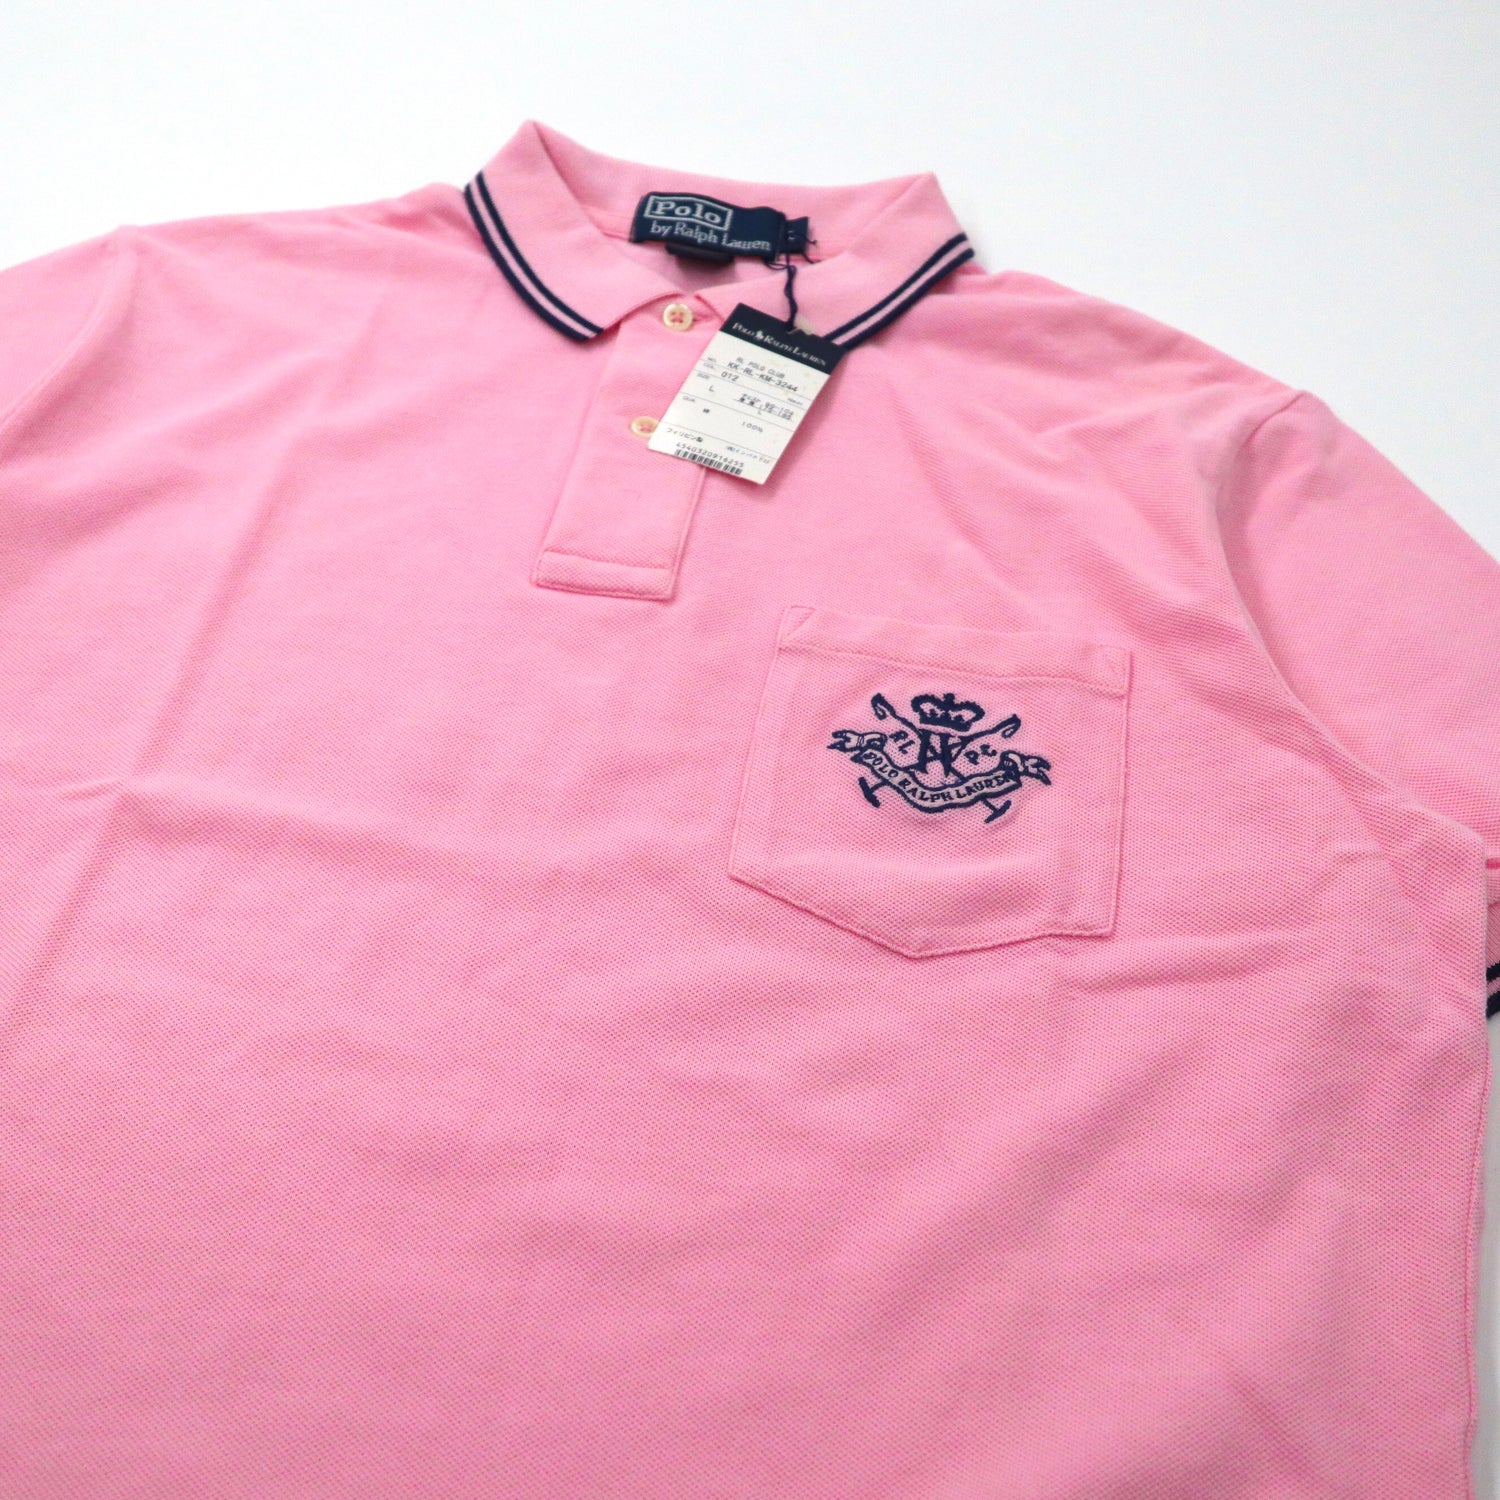 Polo by Ralph Lauren ポロシャツ L ピンク コットン RL POLO CLUB